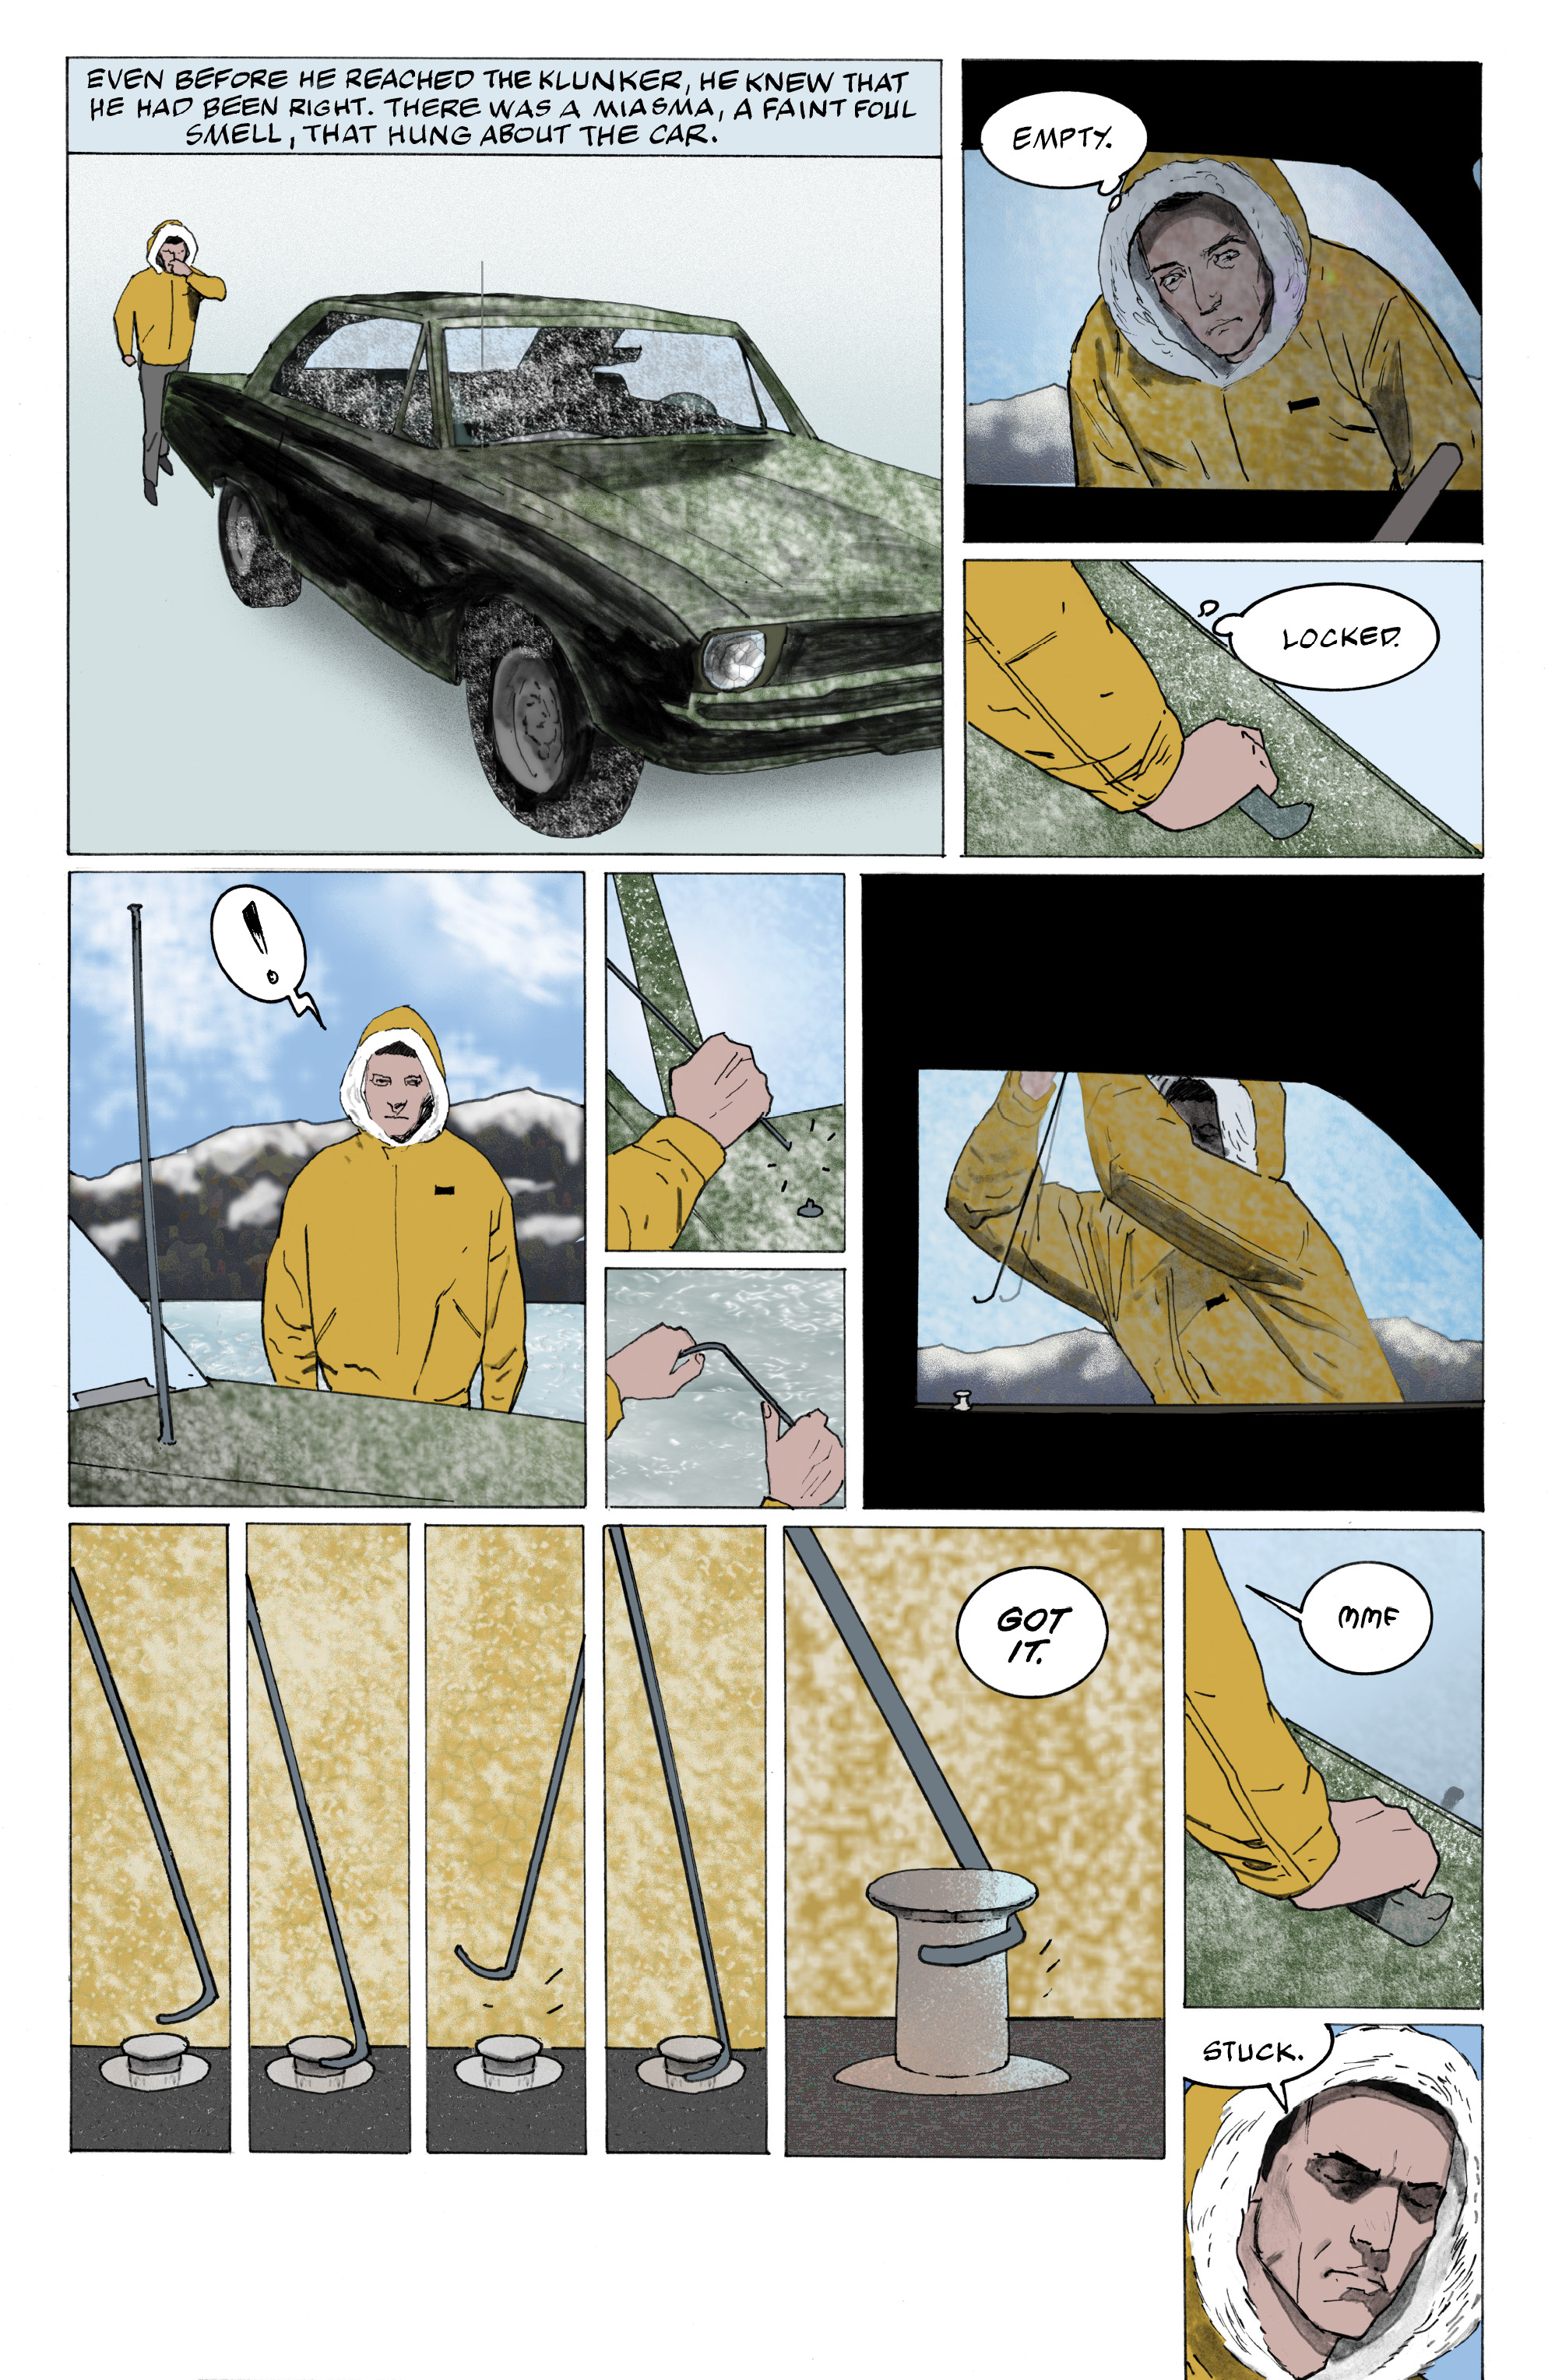 American Gods: The Moment of the Storm (2019): Chapter 8 - Page 4